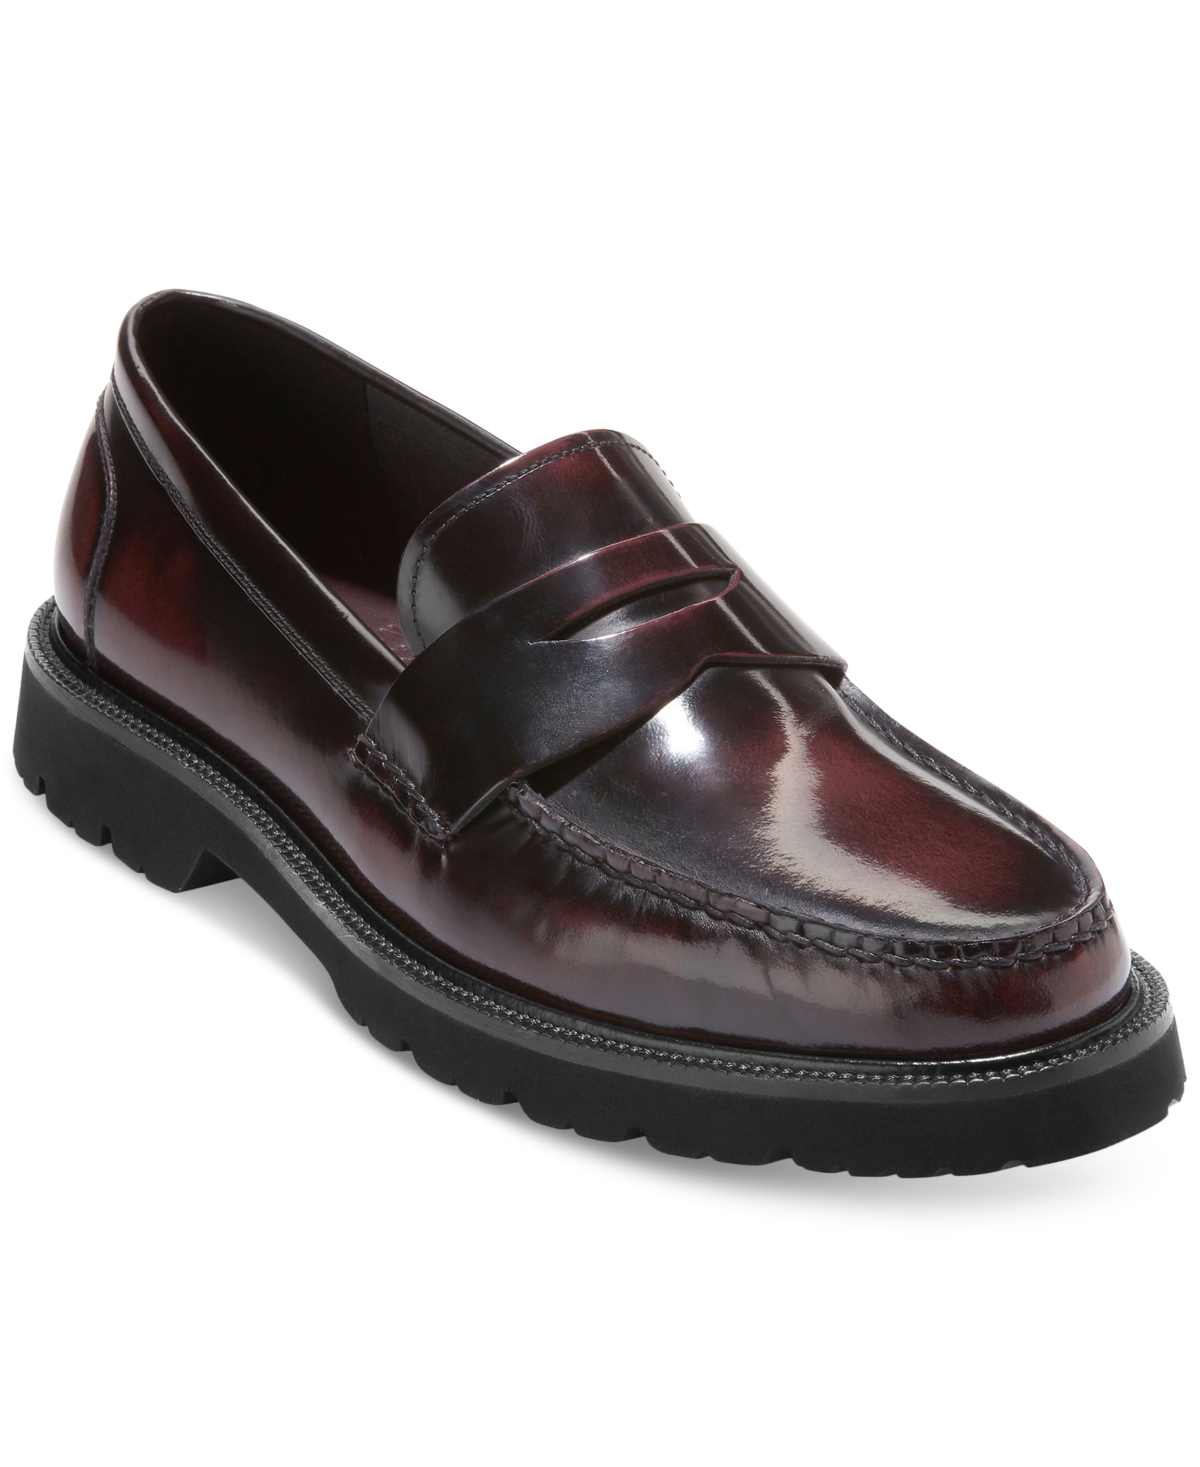 COLE HAAN MEN'S AMERICAN CLASSICS PENNY LOAFER MEN'S SHOES